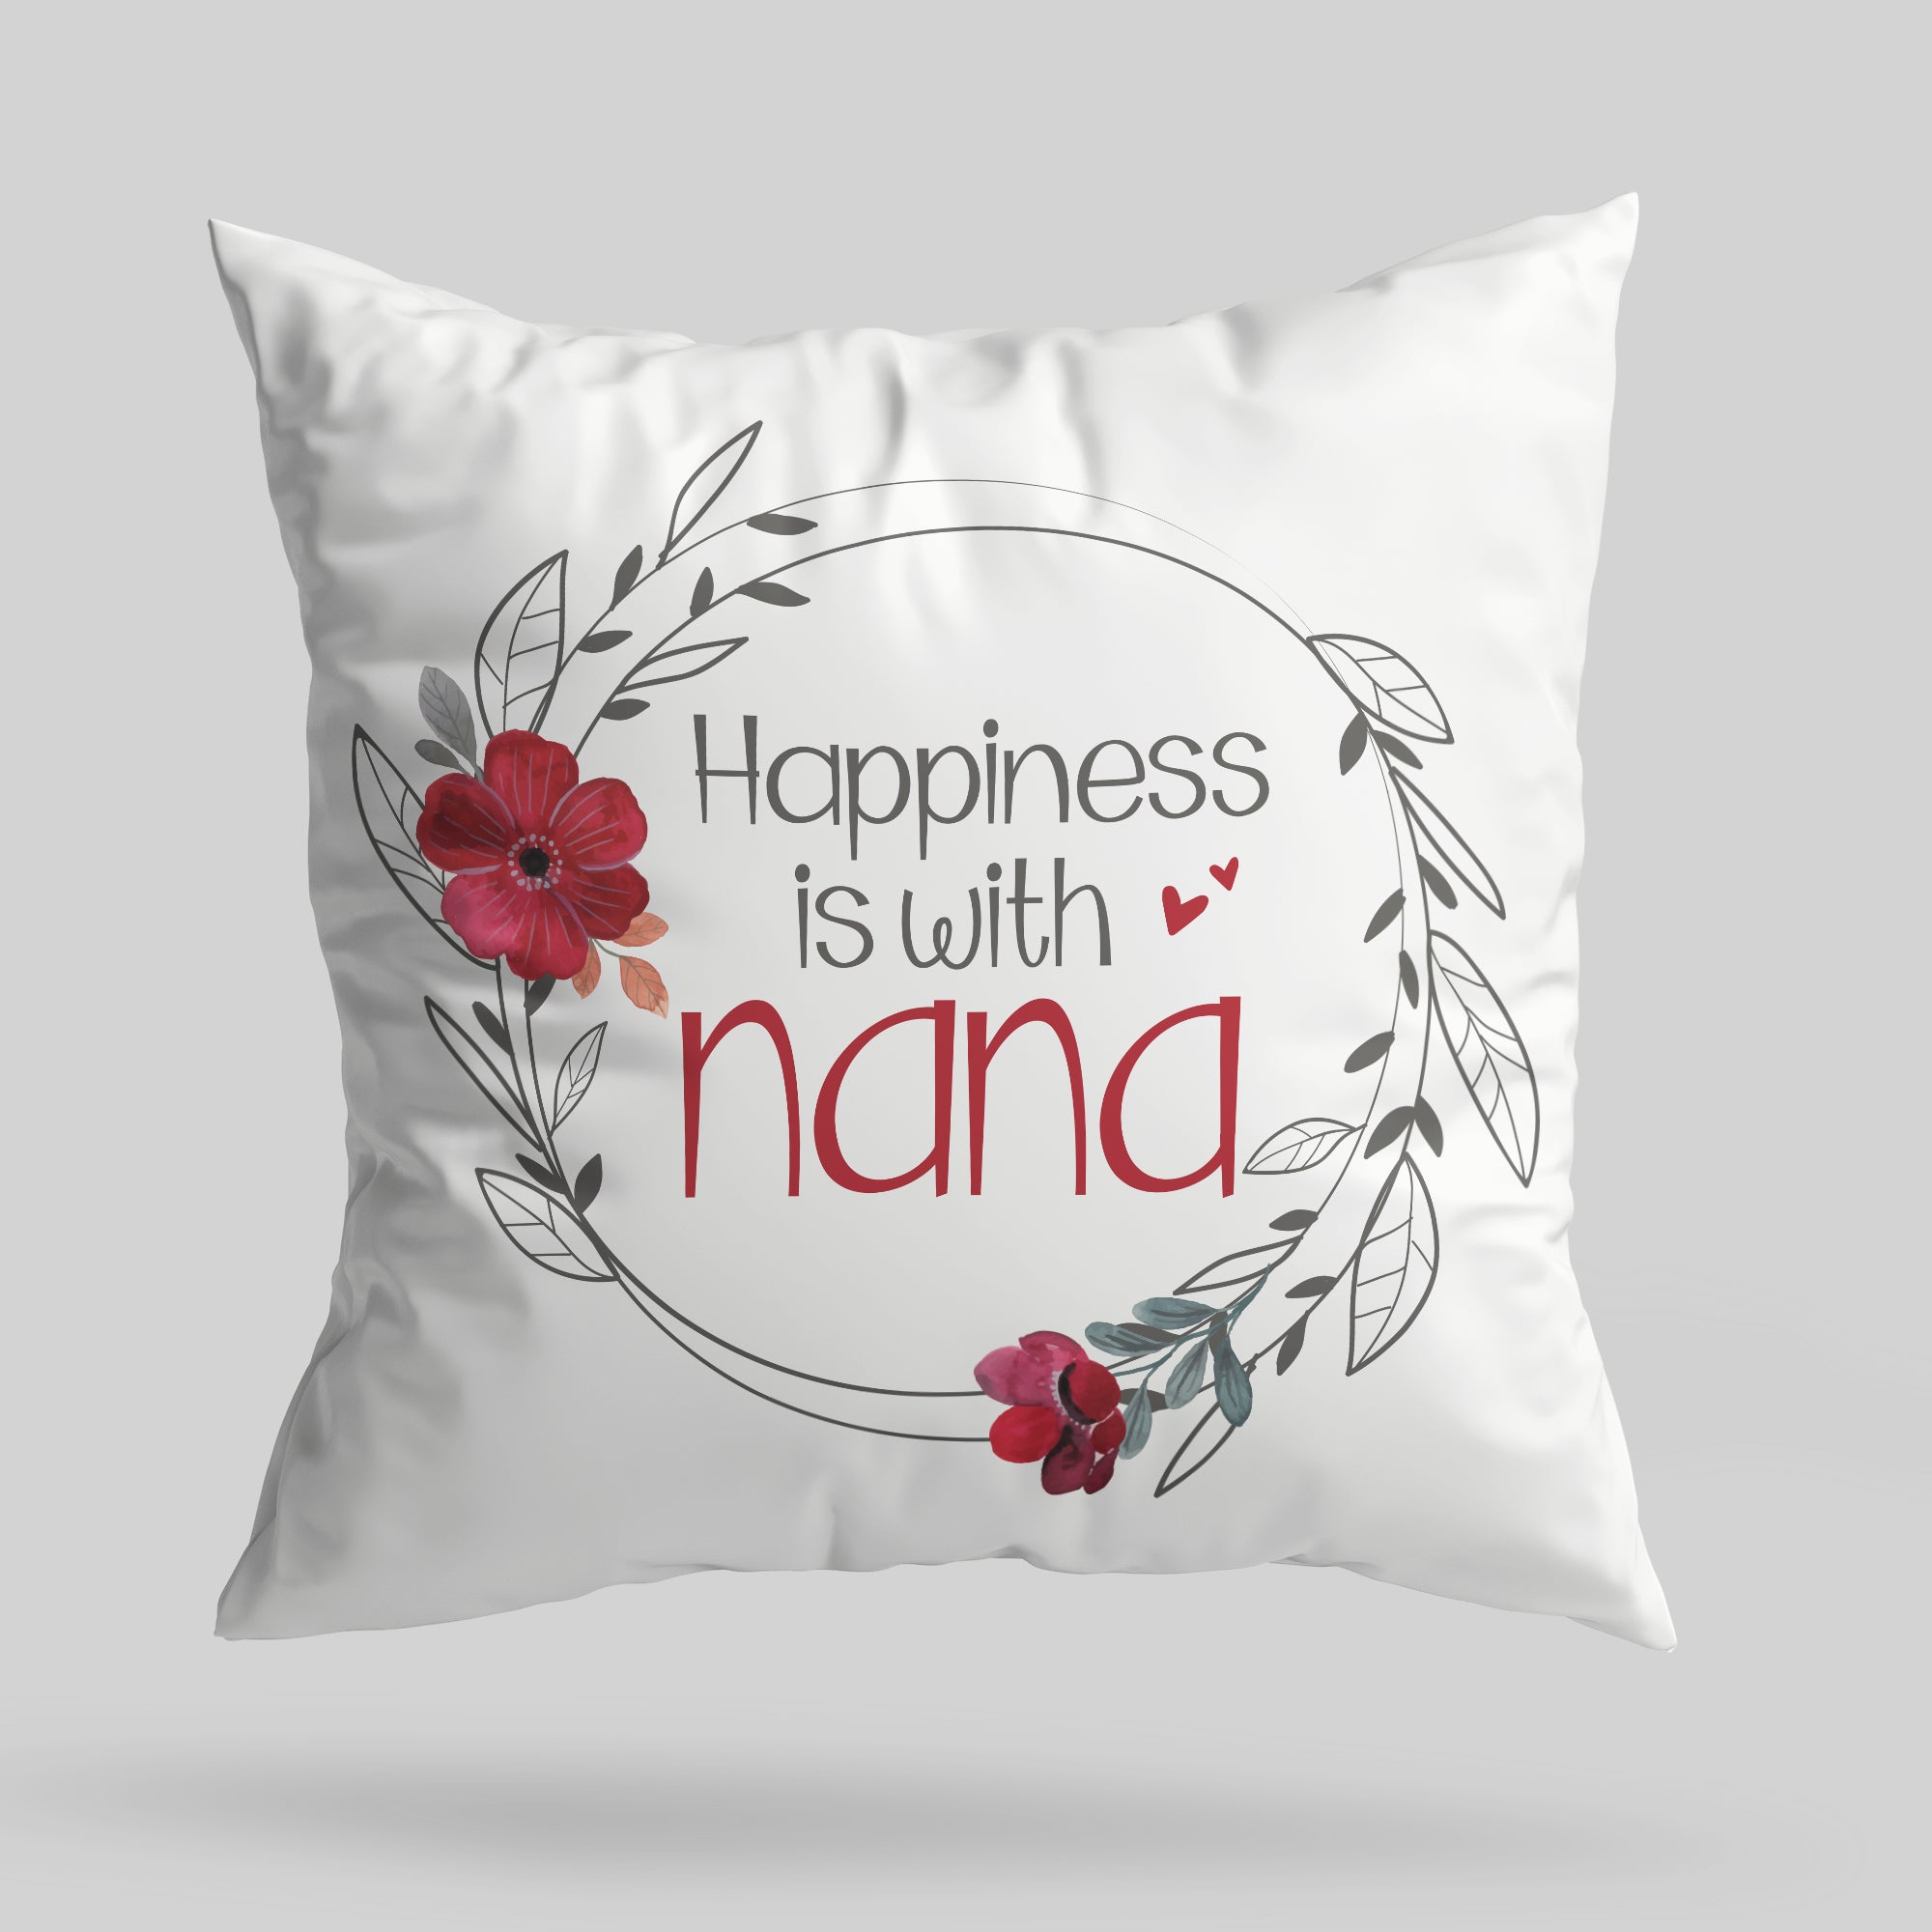 Happiness is with Nana - Canvas Pillow - 207HNTTPI427